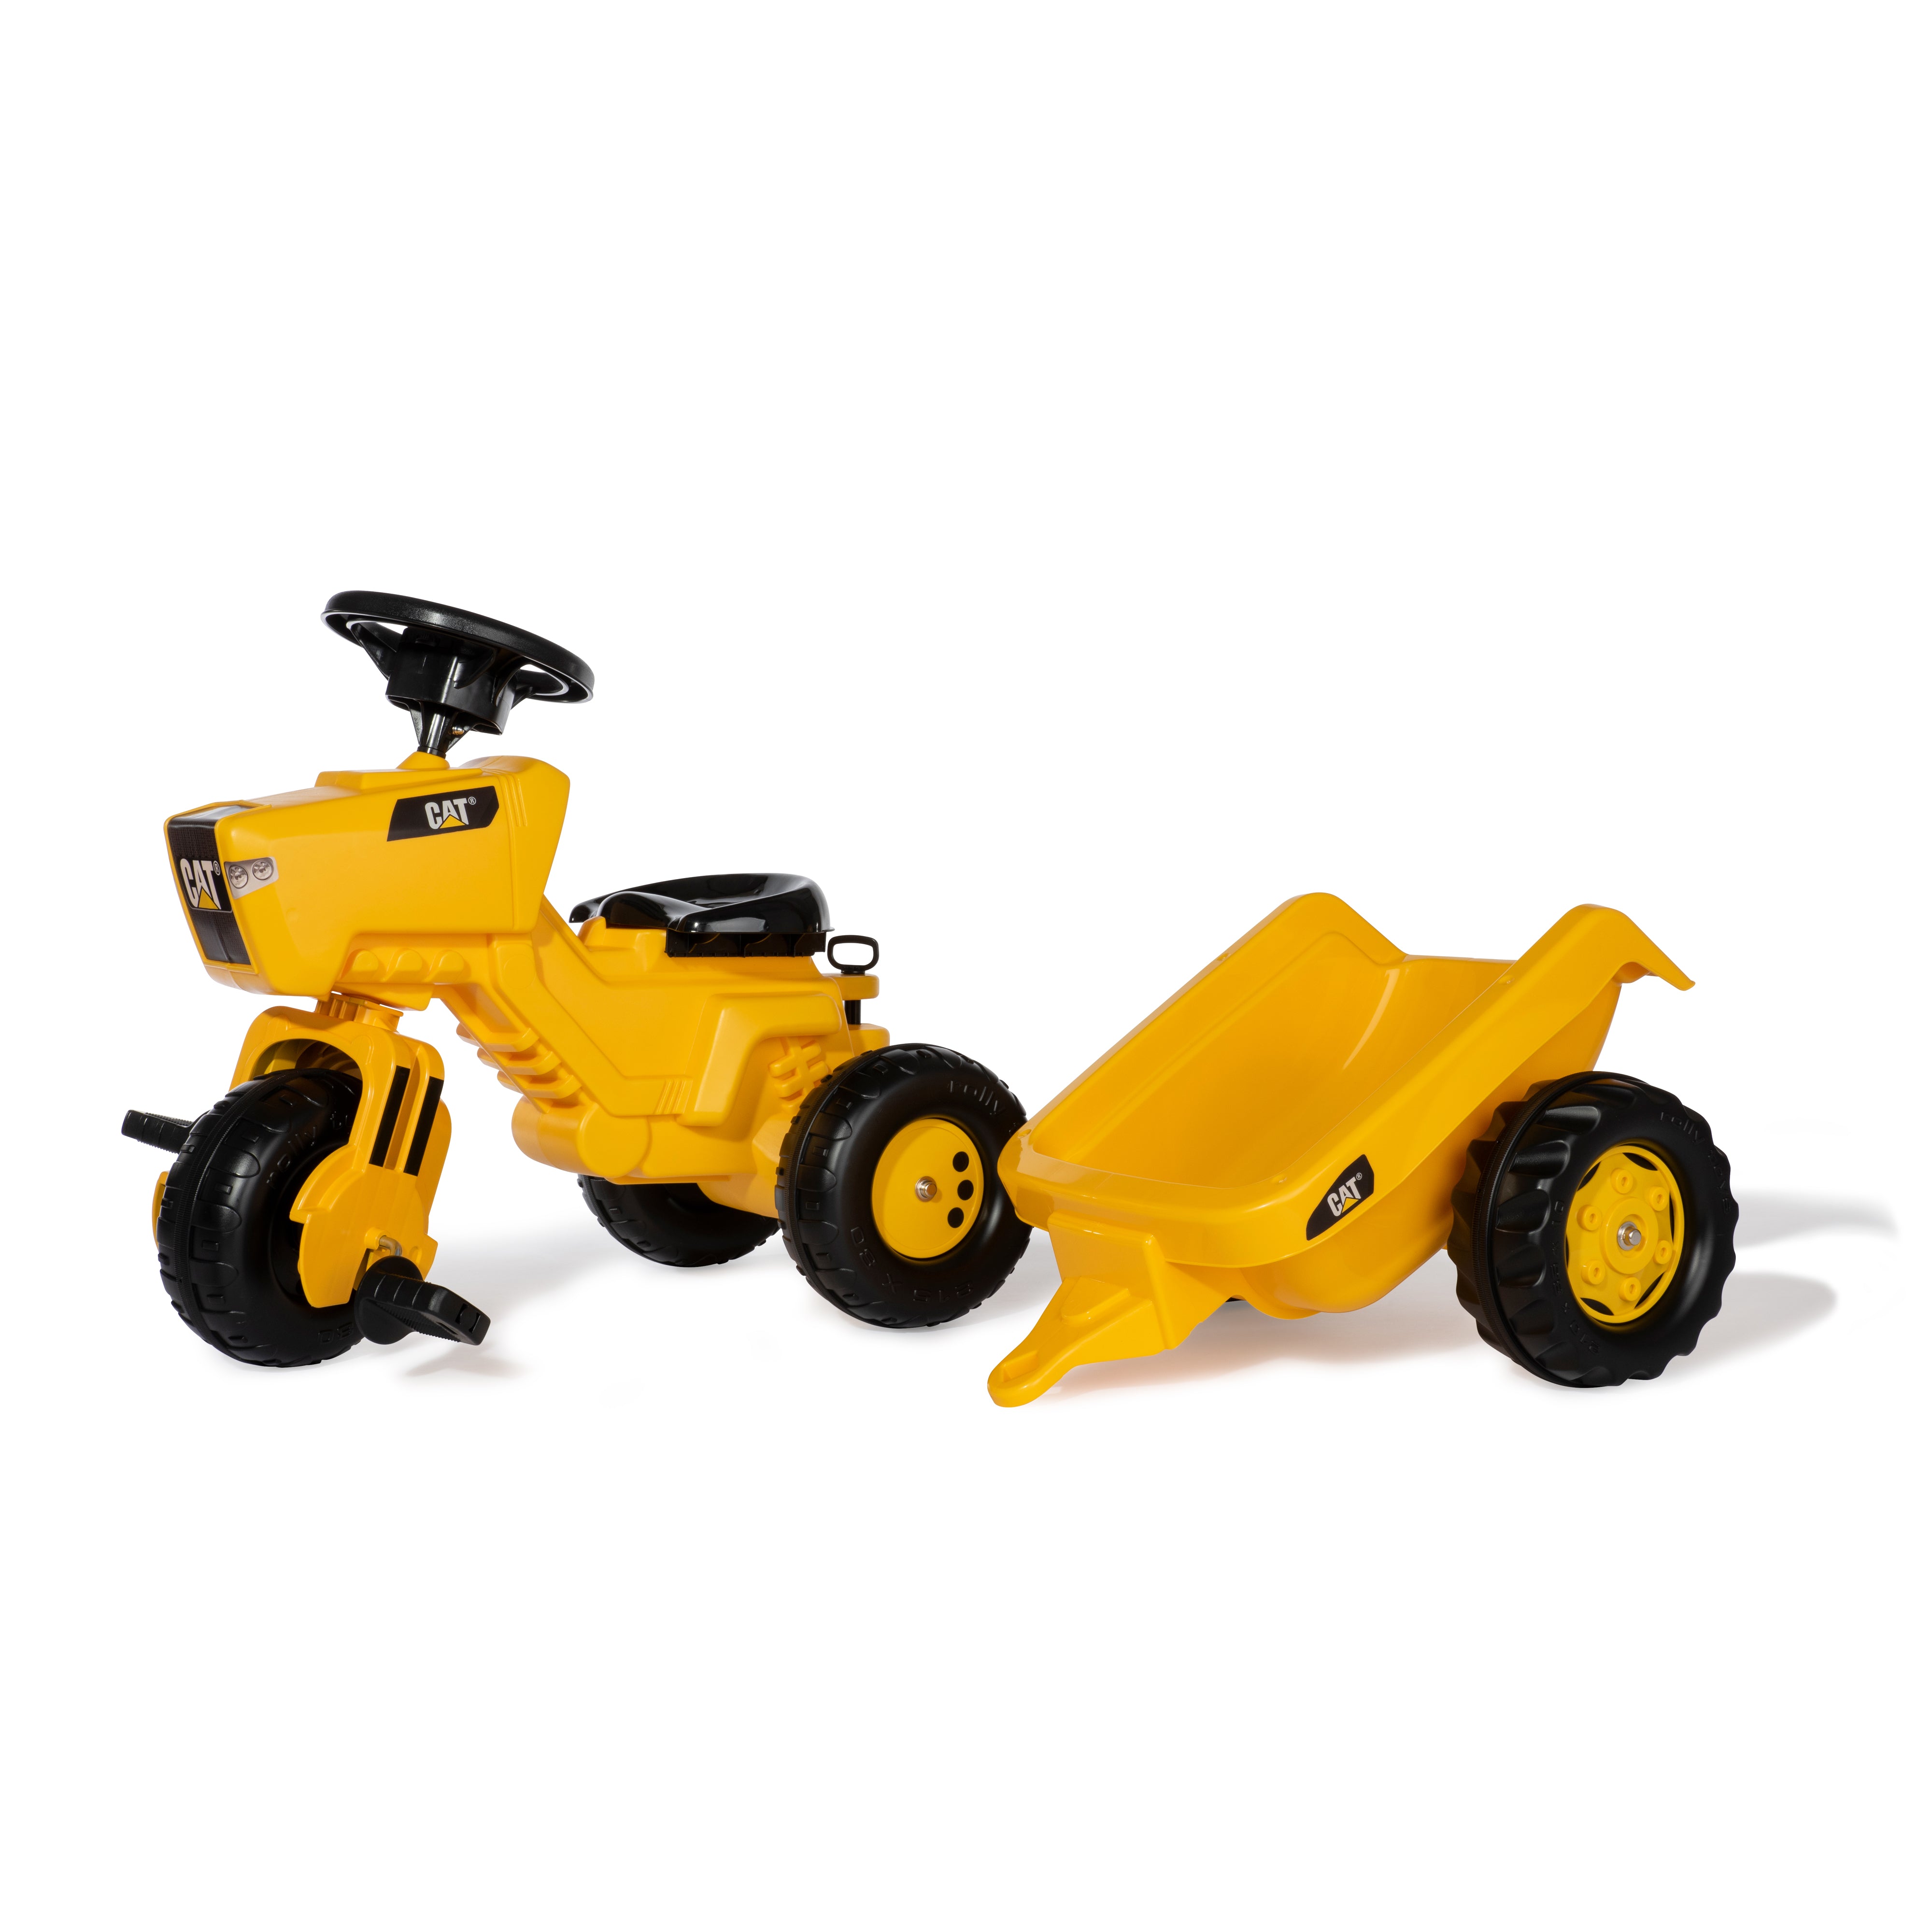 This CAT® Pedal Vehicle is on three wheels so it rides like a Tricycle with the look of a tractor